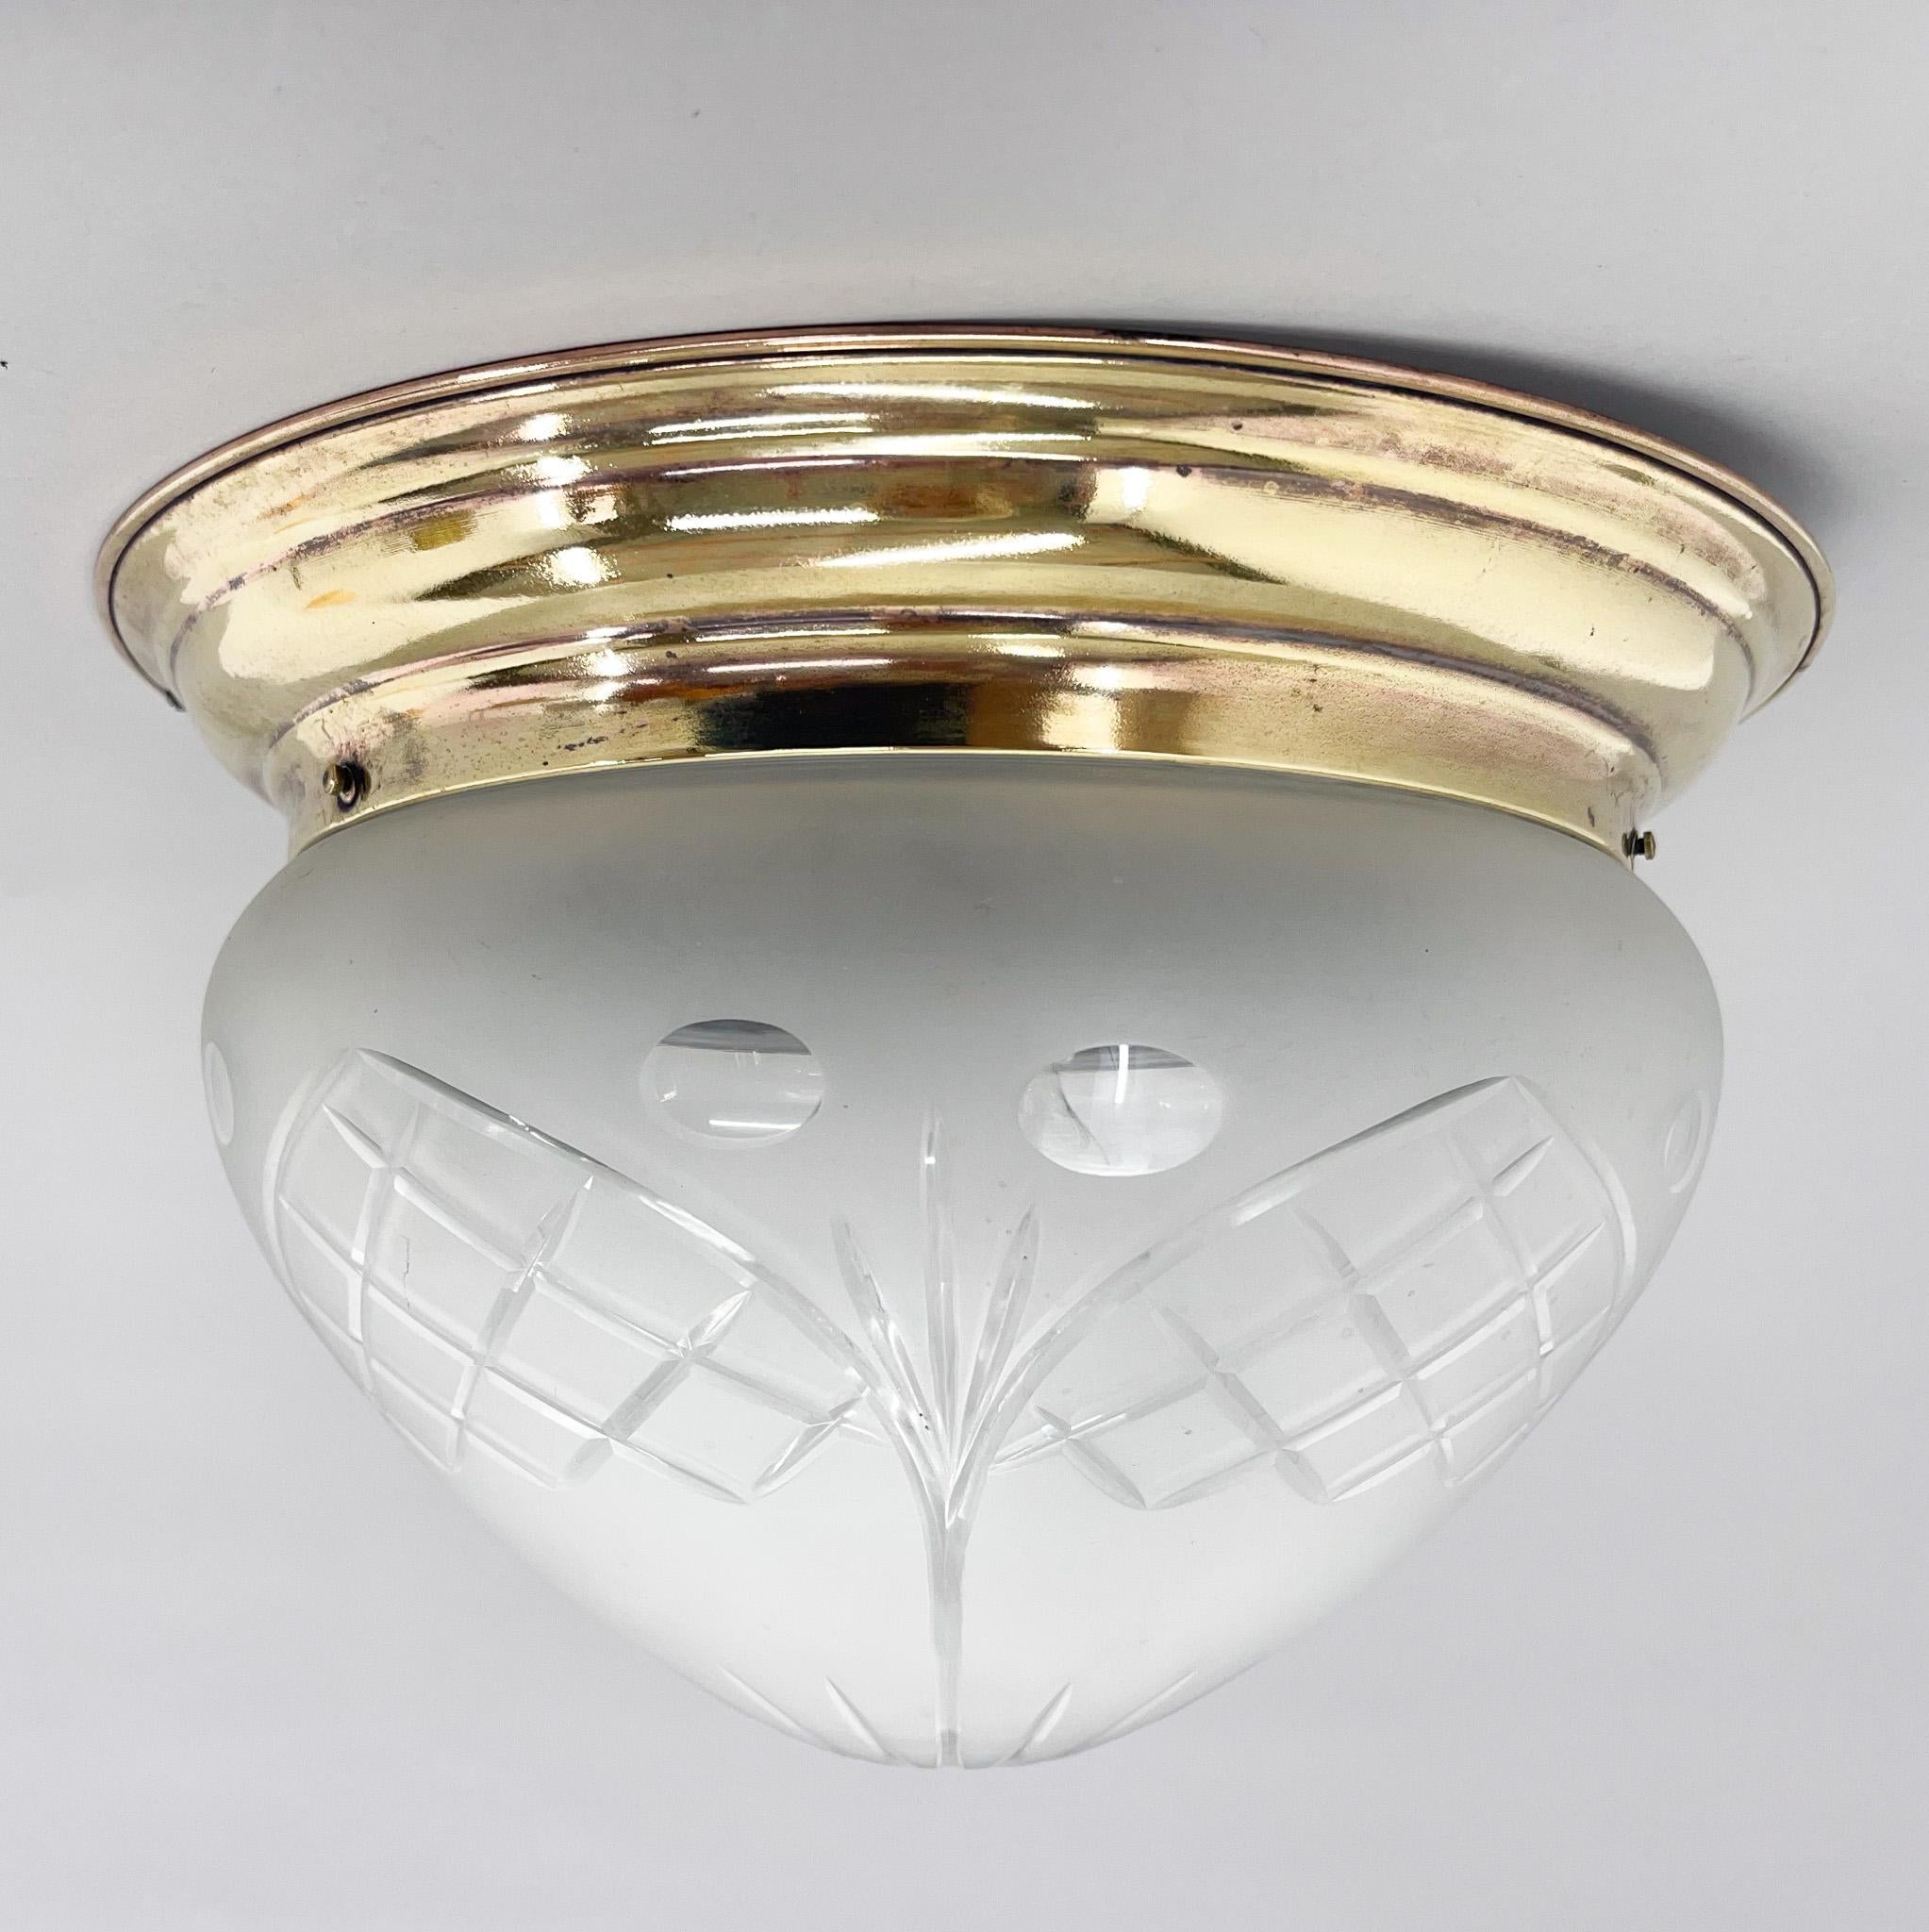 Beautiful ceiling lamp with brass base with patina and cut glass shade. Rewired, US wiring compatible.